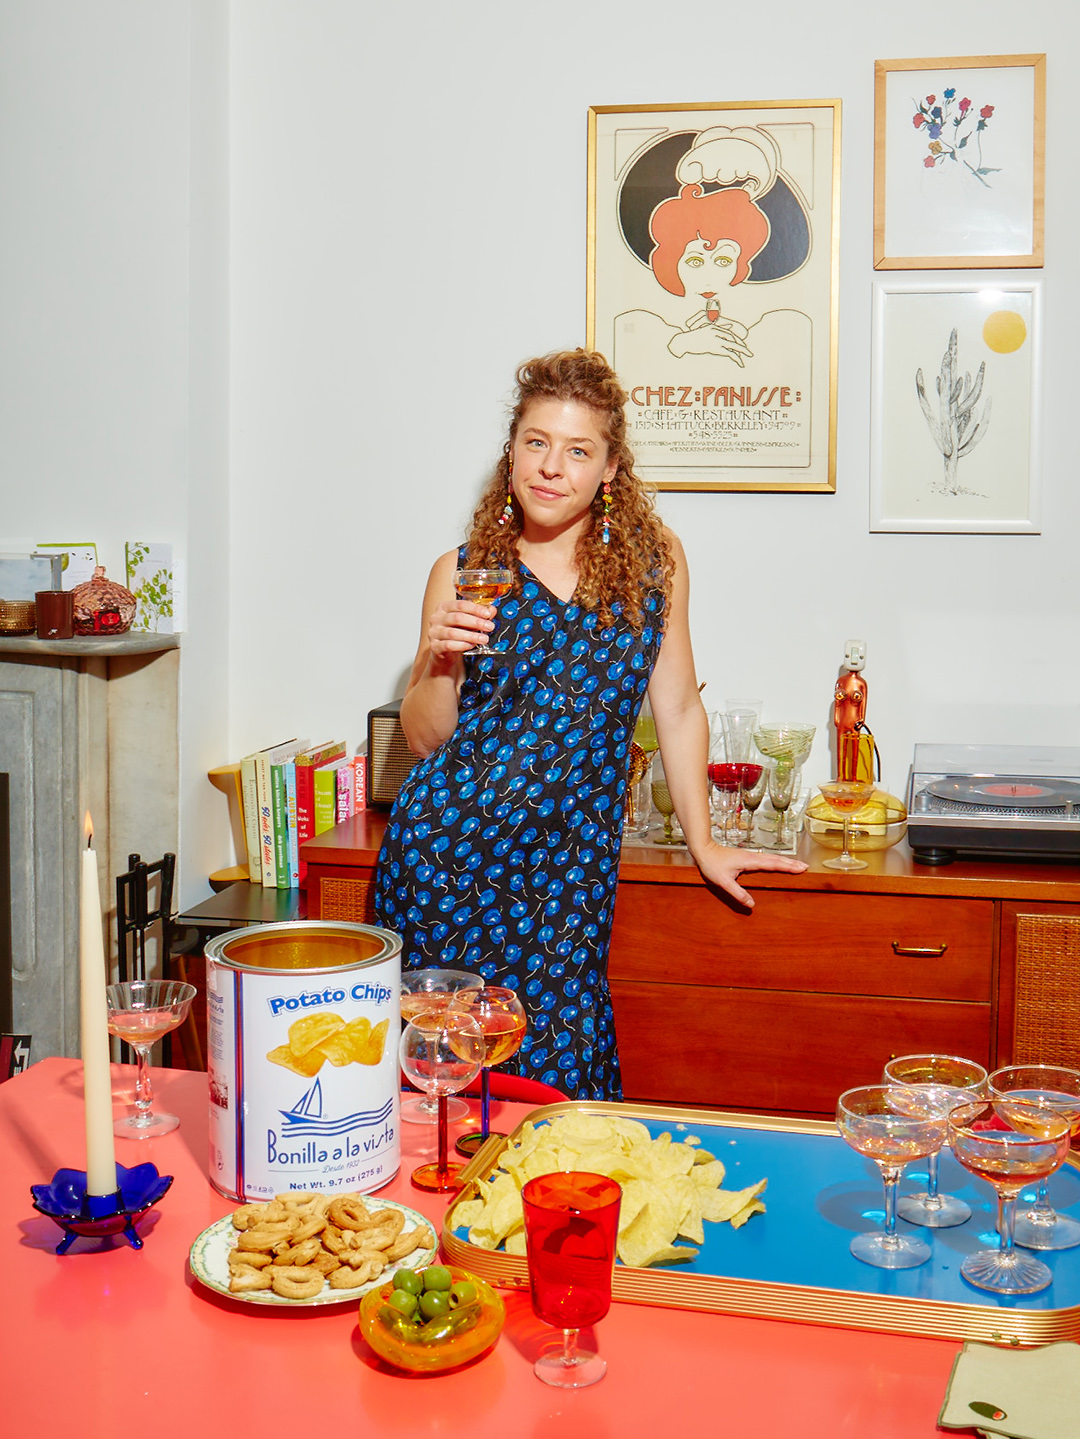 I Own a Store Dedicated to Dinner Parties—Here’s What I Do to Fight Pre-Company Stress